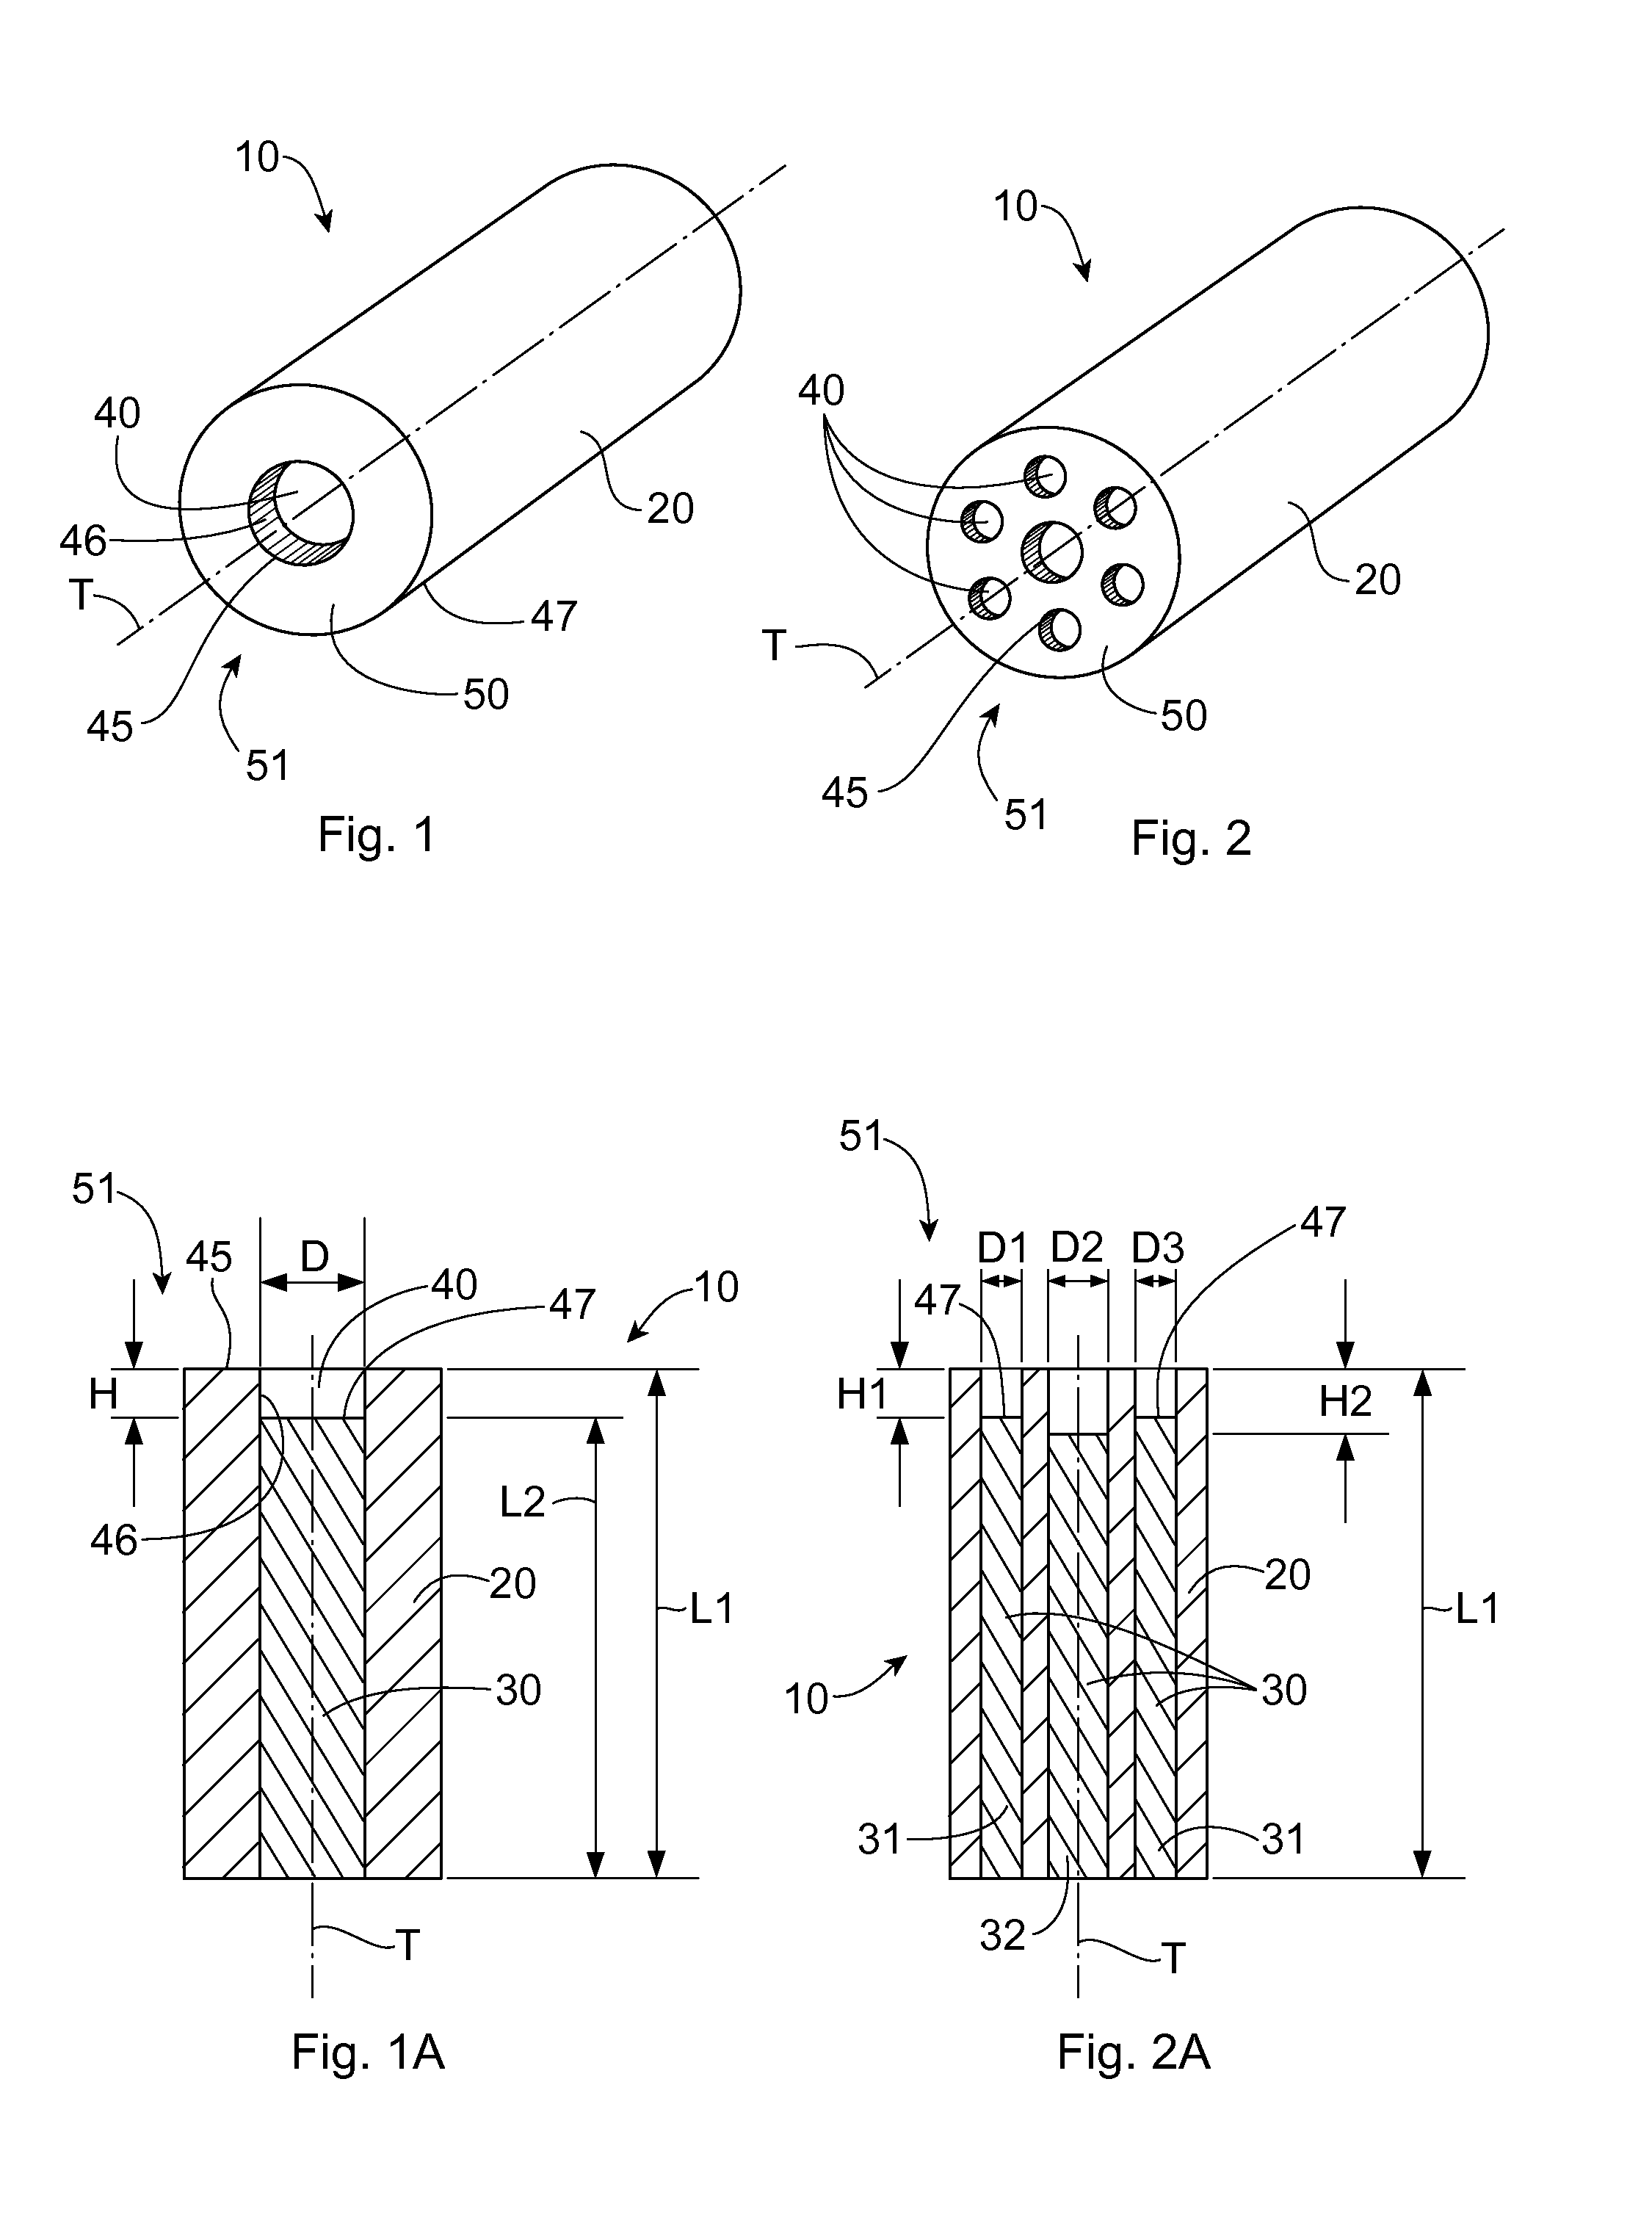 Process for making filament having unique tip and surface characteristics